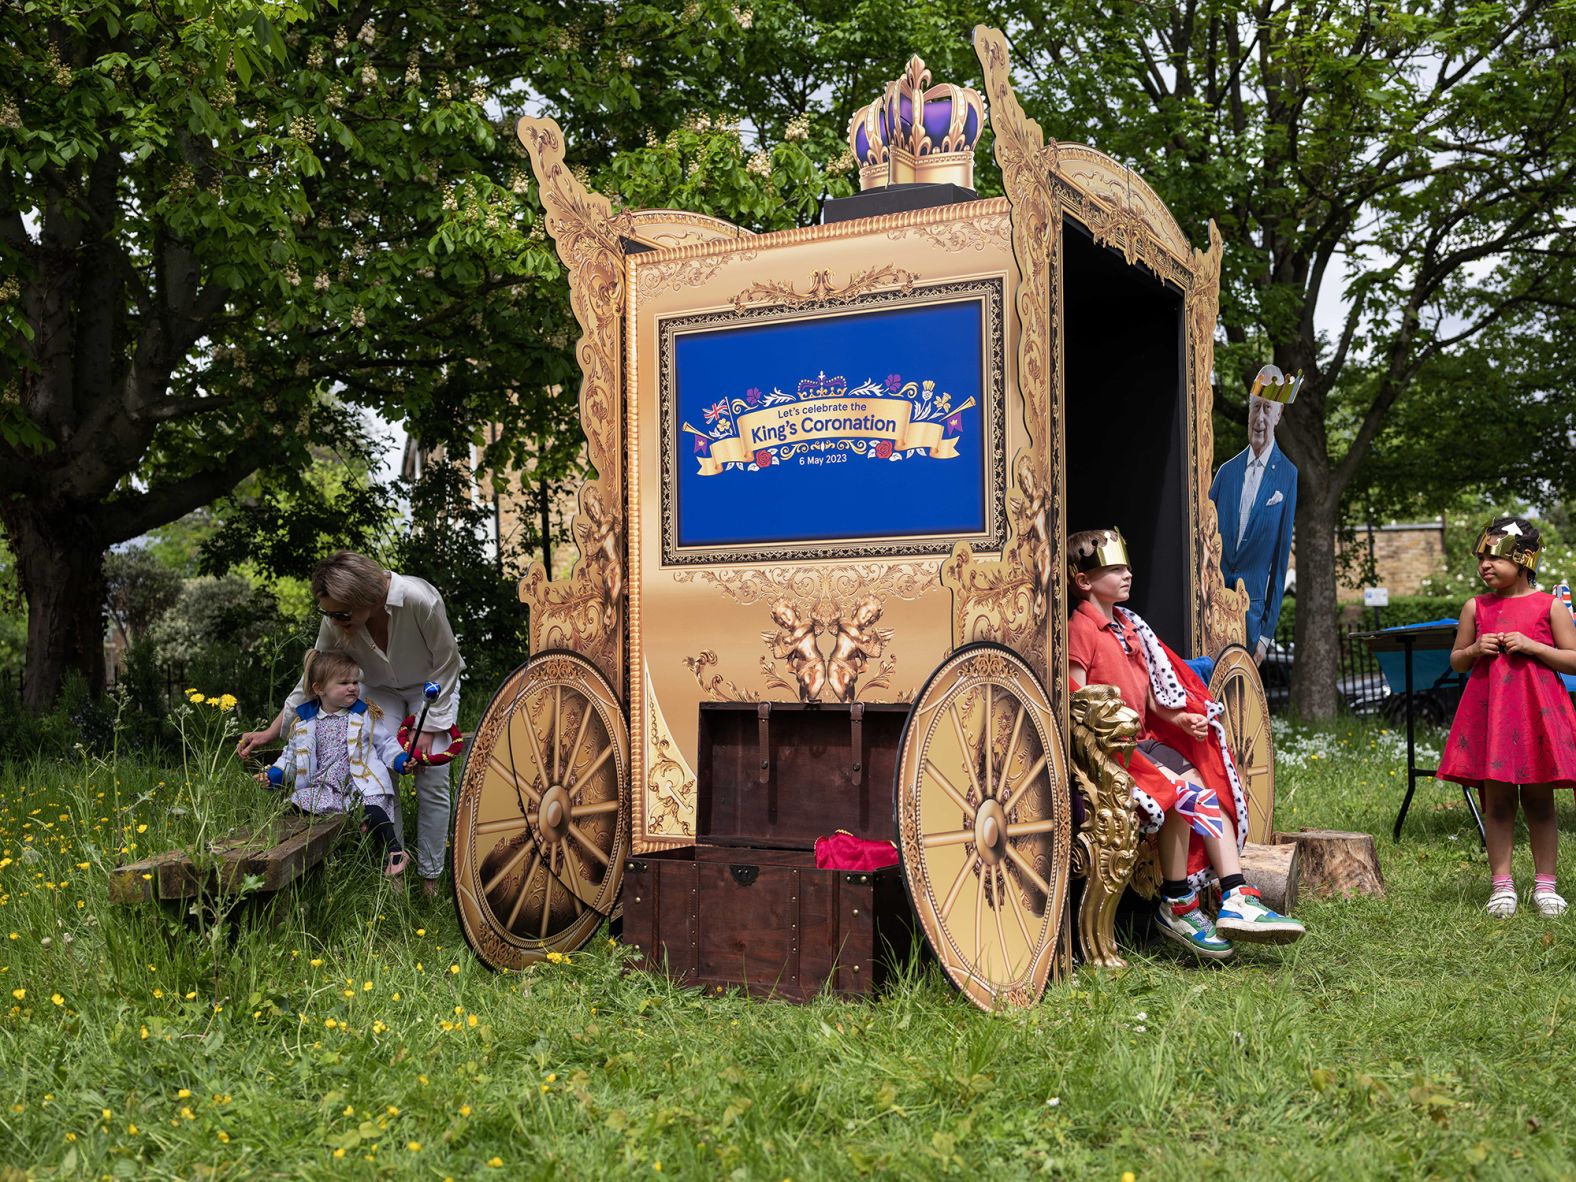 Kids play and pose for pictures at a makeshift carriage next to a cardboard cutout of the King at a street party in London.